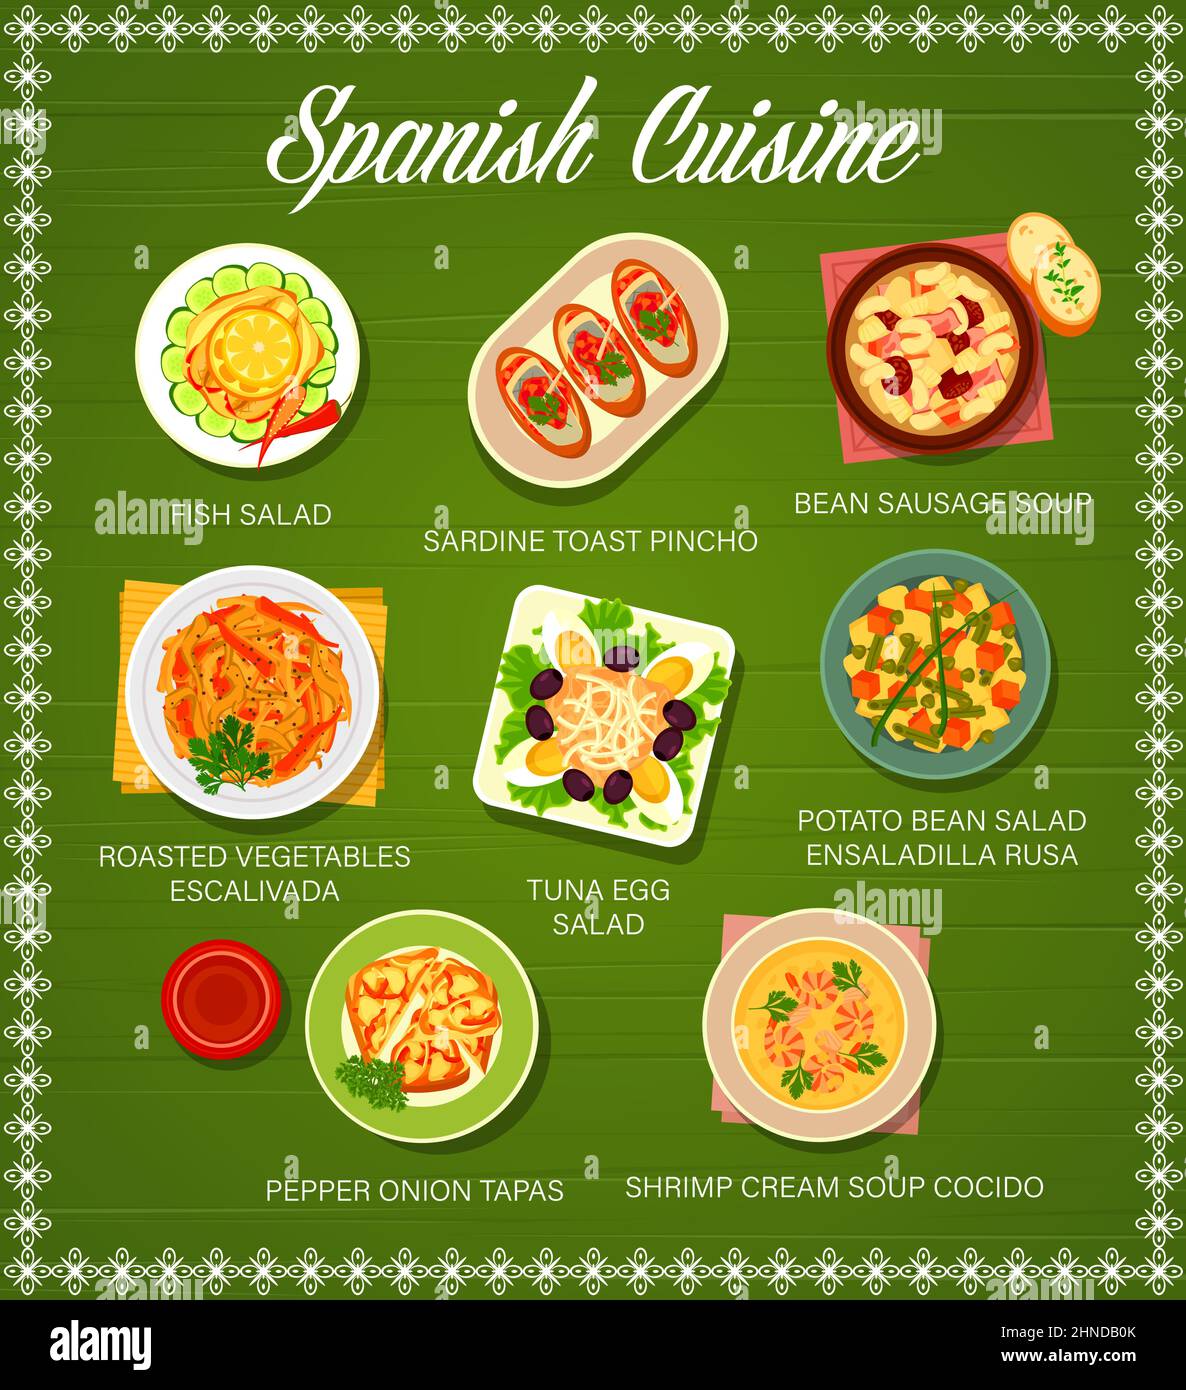 Spanish cuisine restaurant menu vector card with vegetable tapas, meat and fish food dishes. Tuna, egg and olive salad, shrimp cream soup and sausage Stock Vector